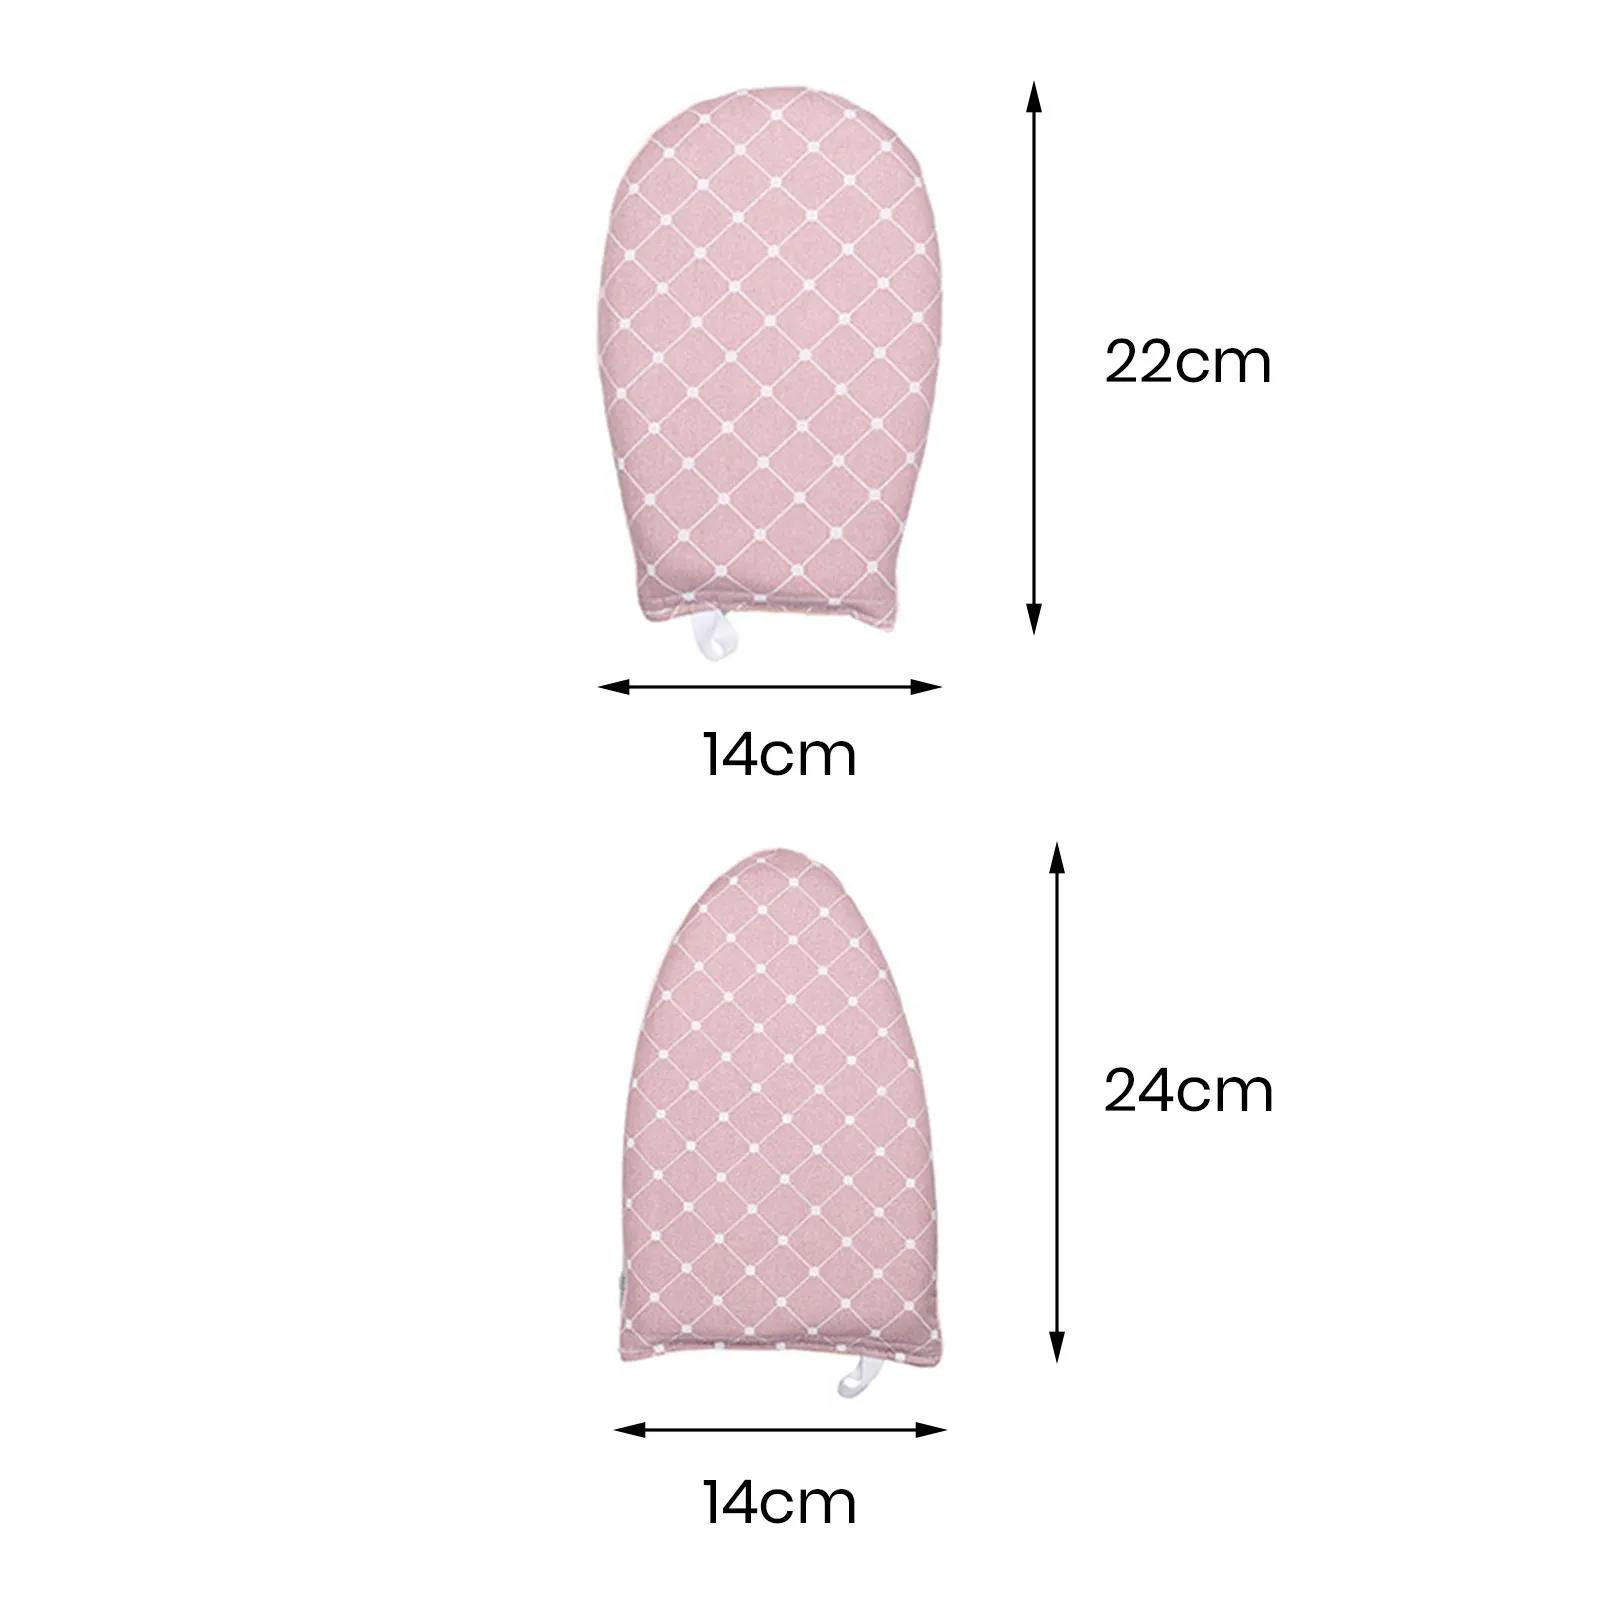 OEM Washable Ironing Board Mini Anti-scald Iron Pad Cover Heat-resistant Stain Resistant Grey Ironing Board for Clothing Store